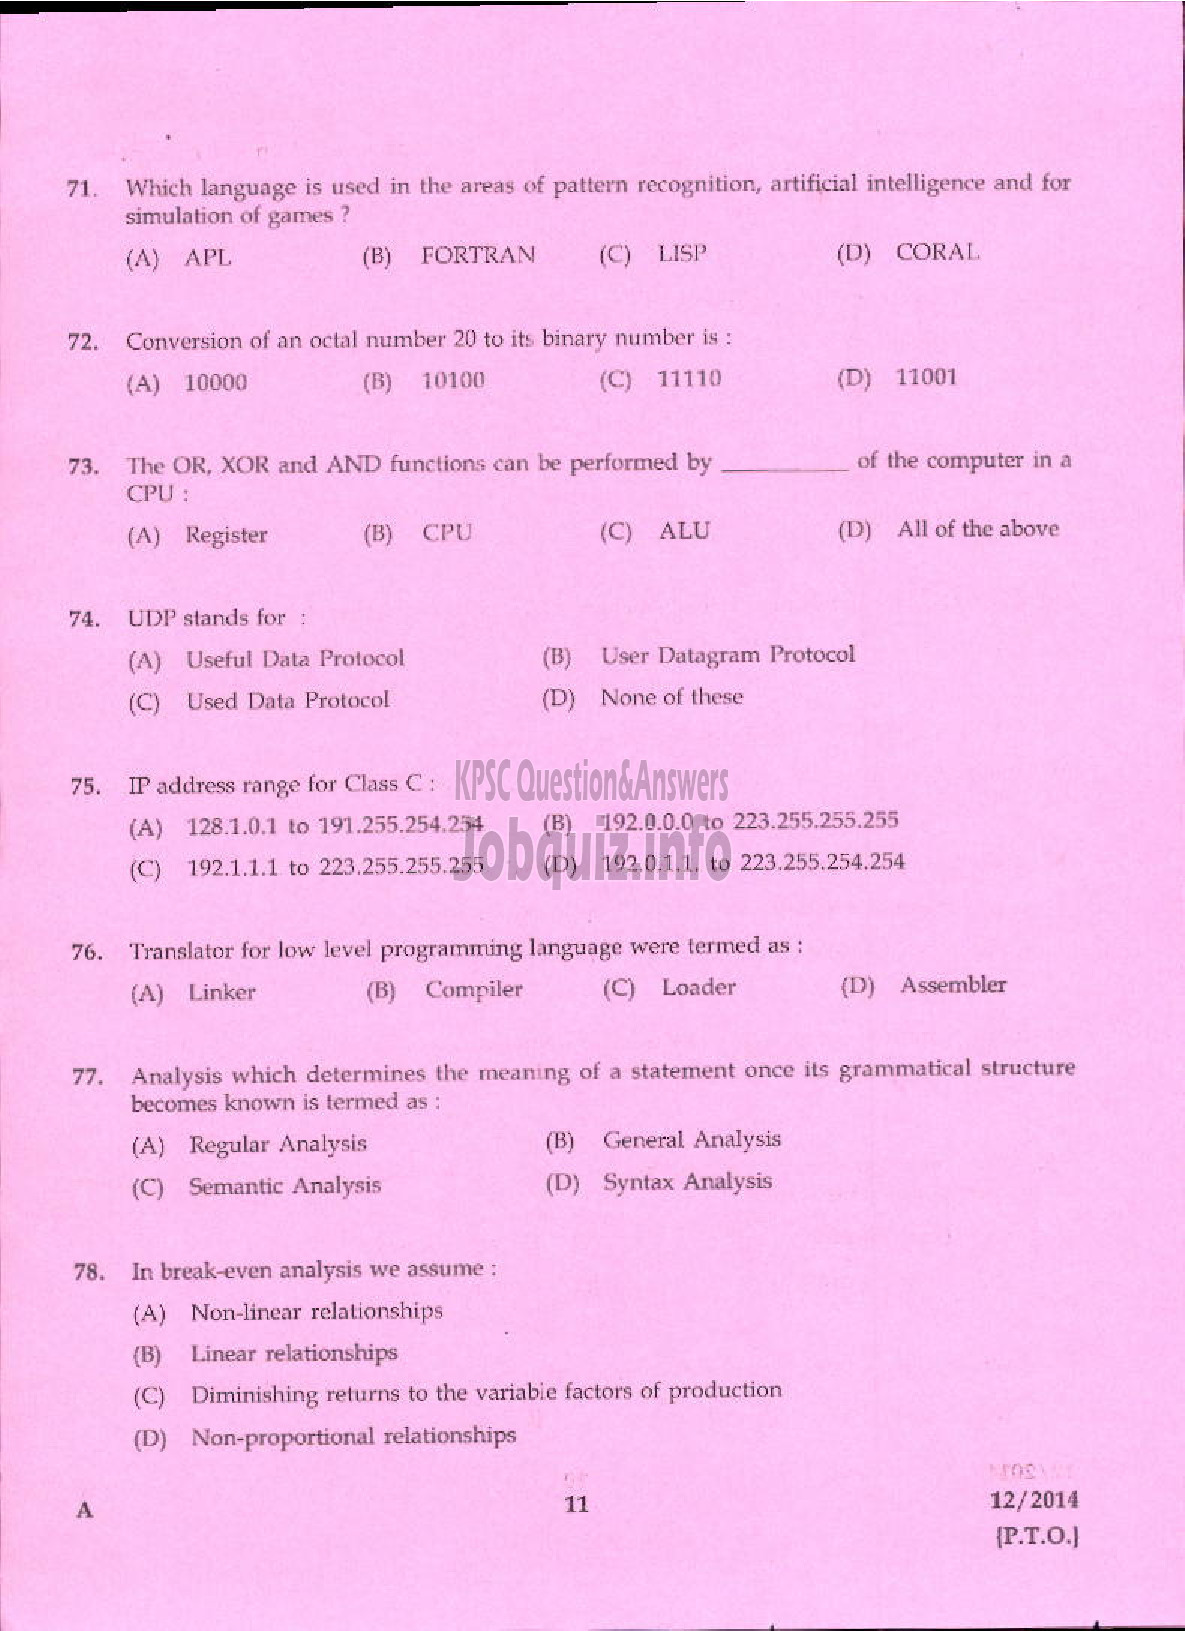 Kerala PSC Question Paper - VOCATIONAL INSTRUCTOR IN COMPUTER APPLICATION VHSE-9